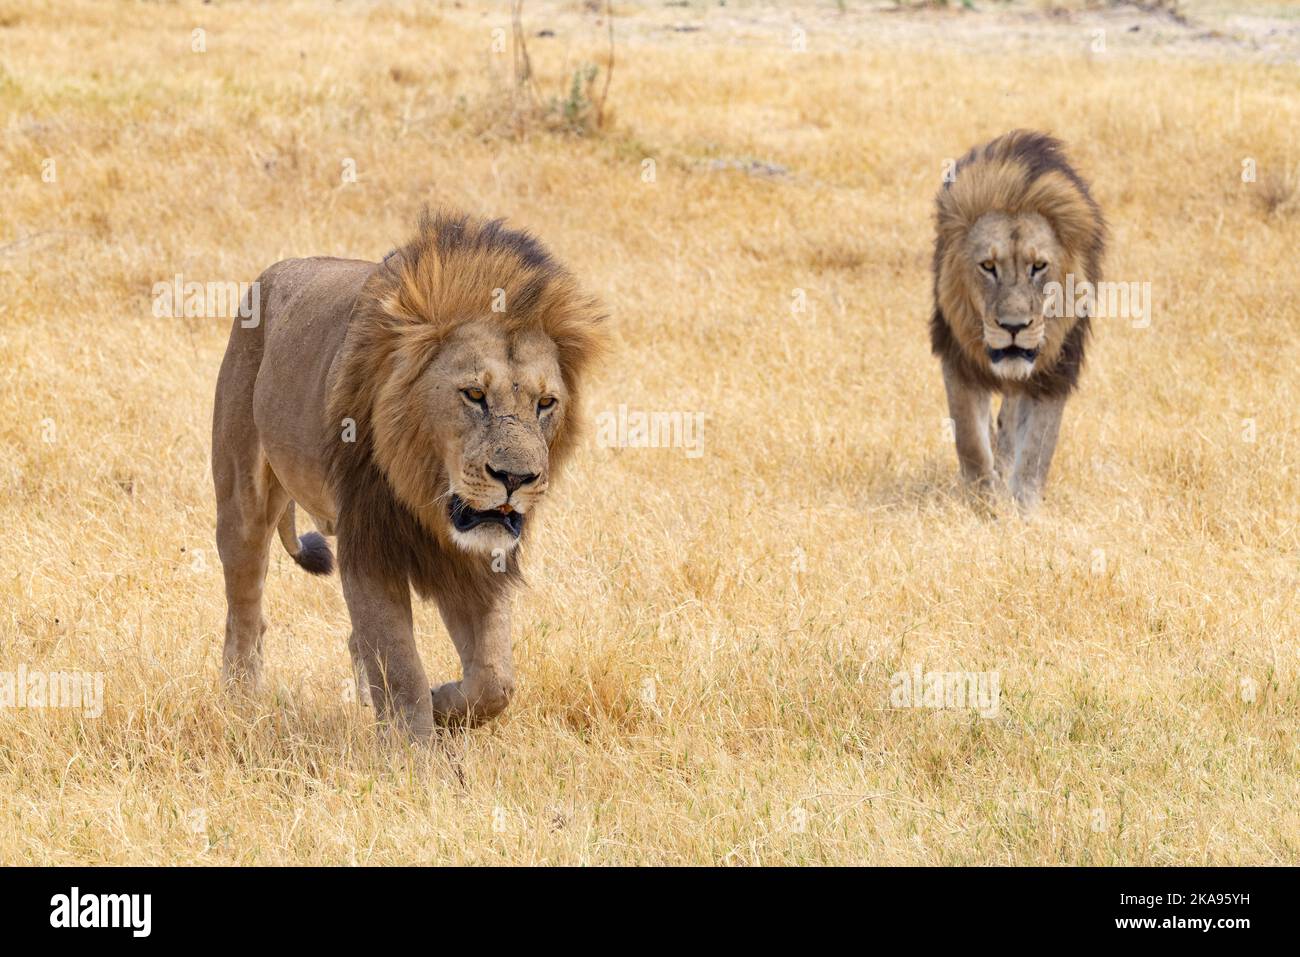 Lions Africa; Two magnificent adult male Lions, Panthera leo, walking in grass; Moremi Game reserve, Okavango Delta Botswana Africa. African animals. Stock Photo